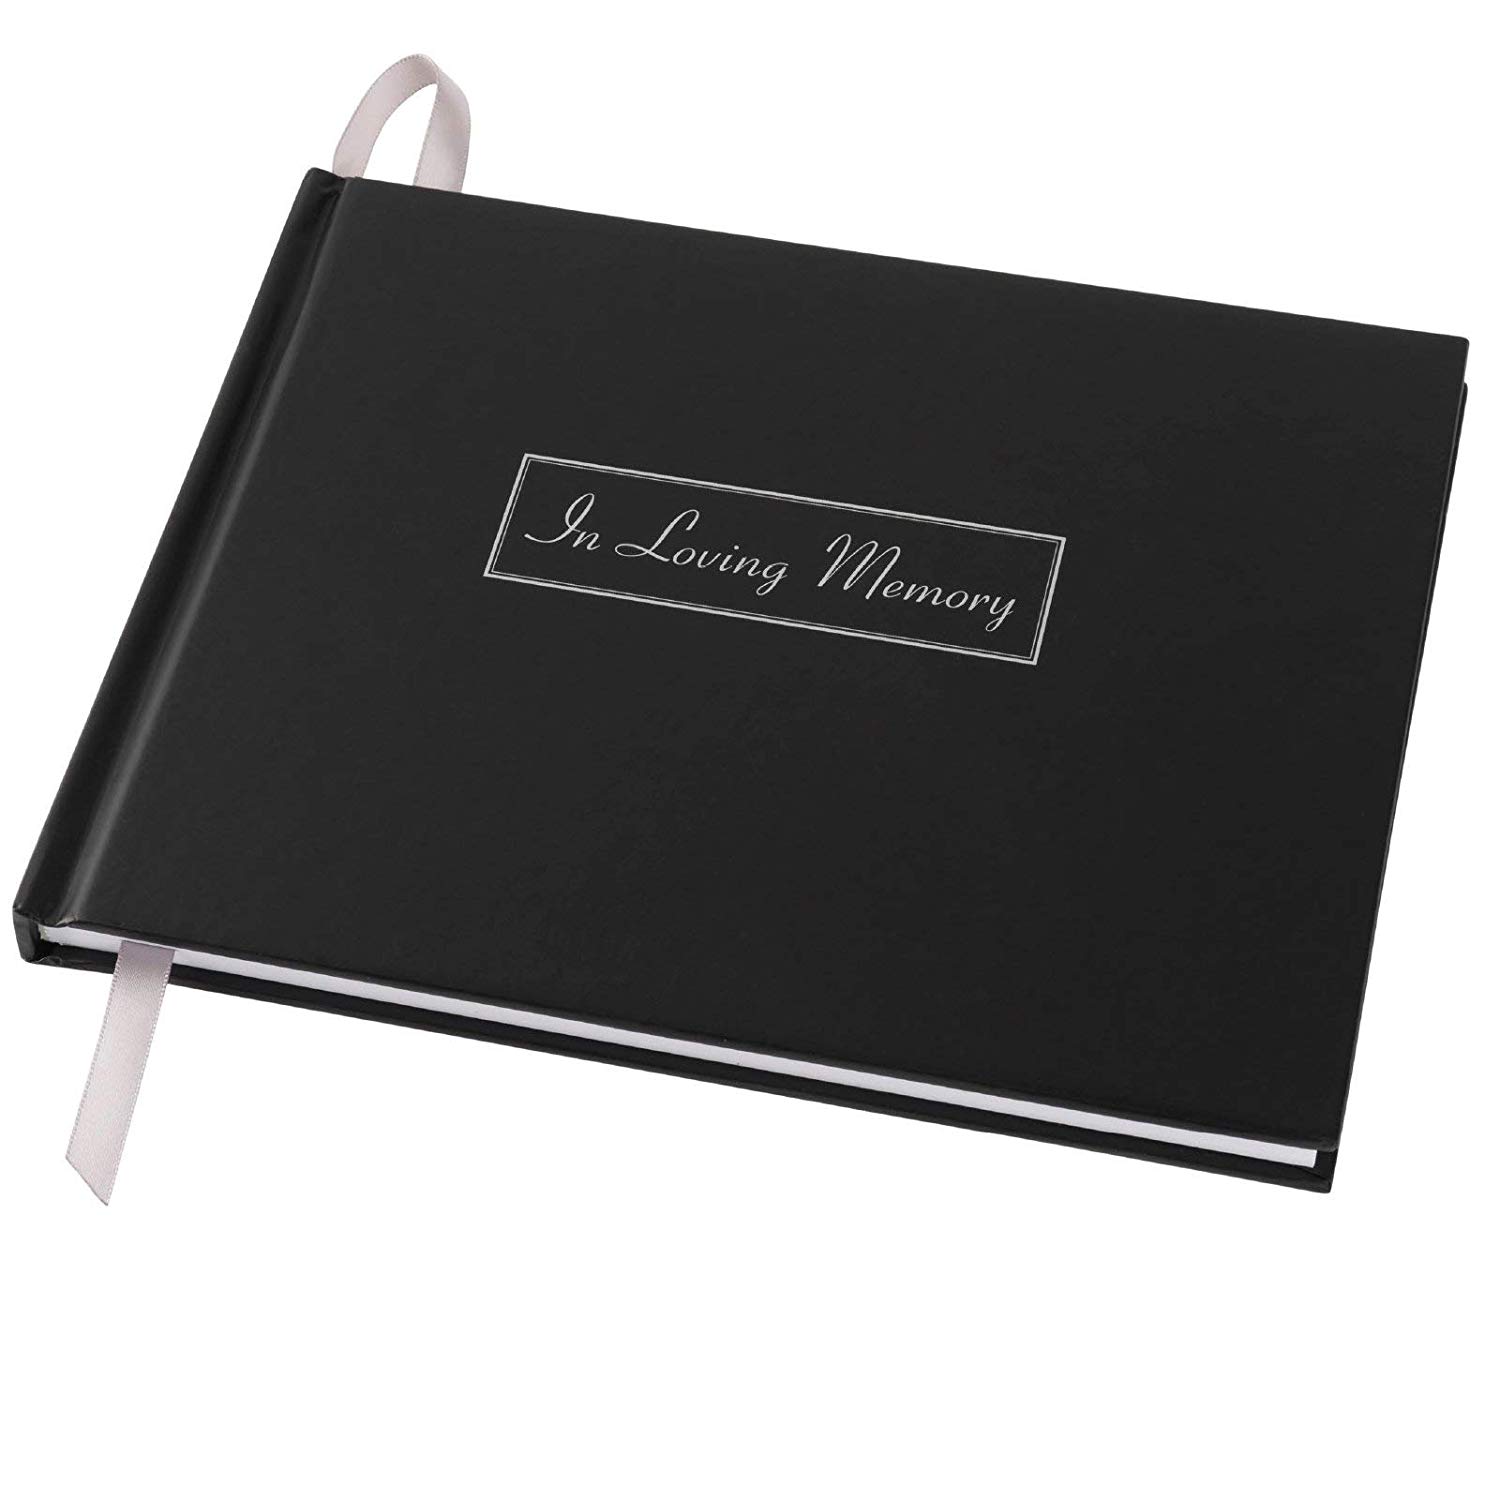 Funeral Guest Book on Amazon